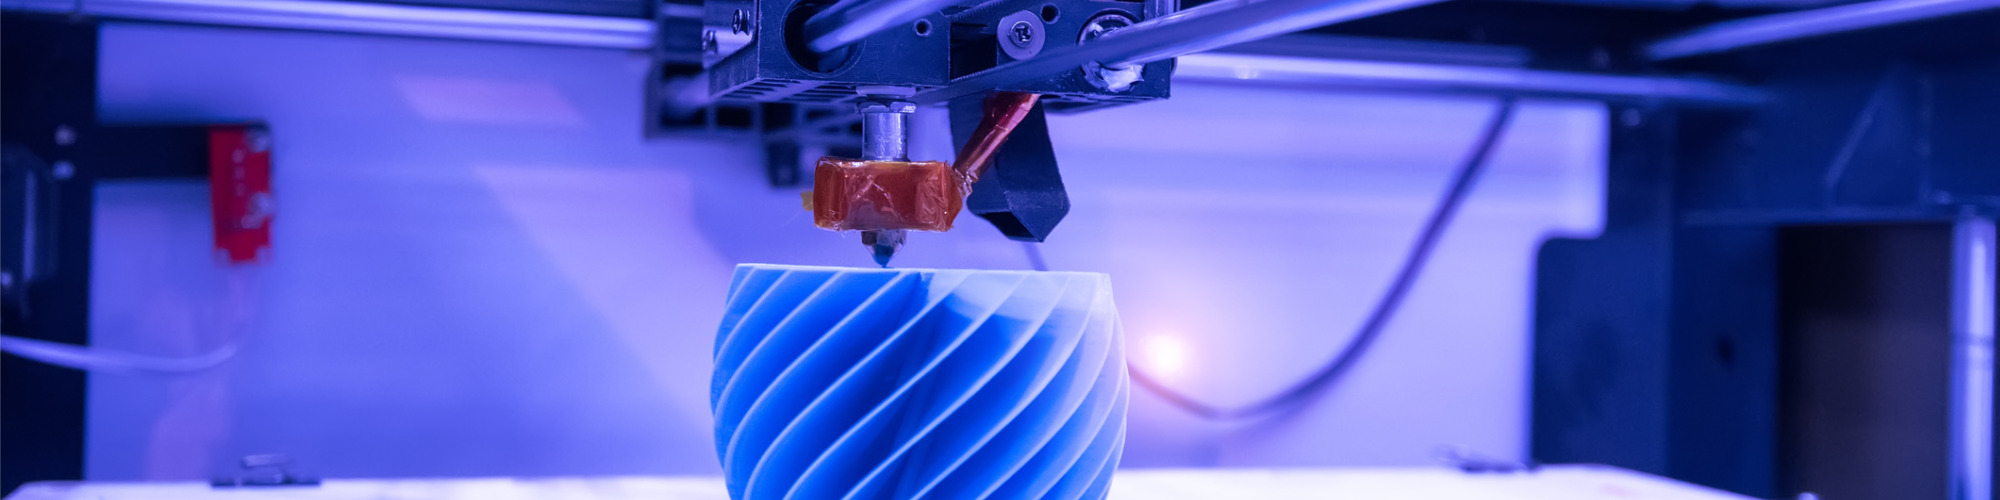 3D Printing & IP Rights - An Introduction to the Key Issues